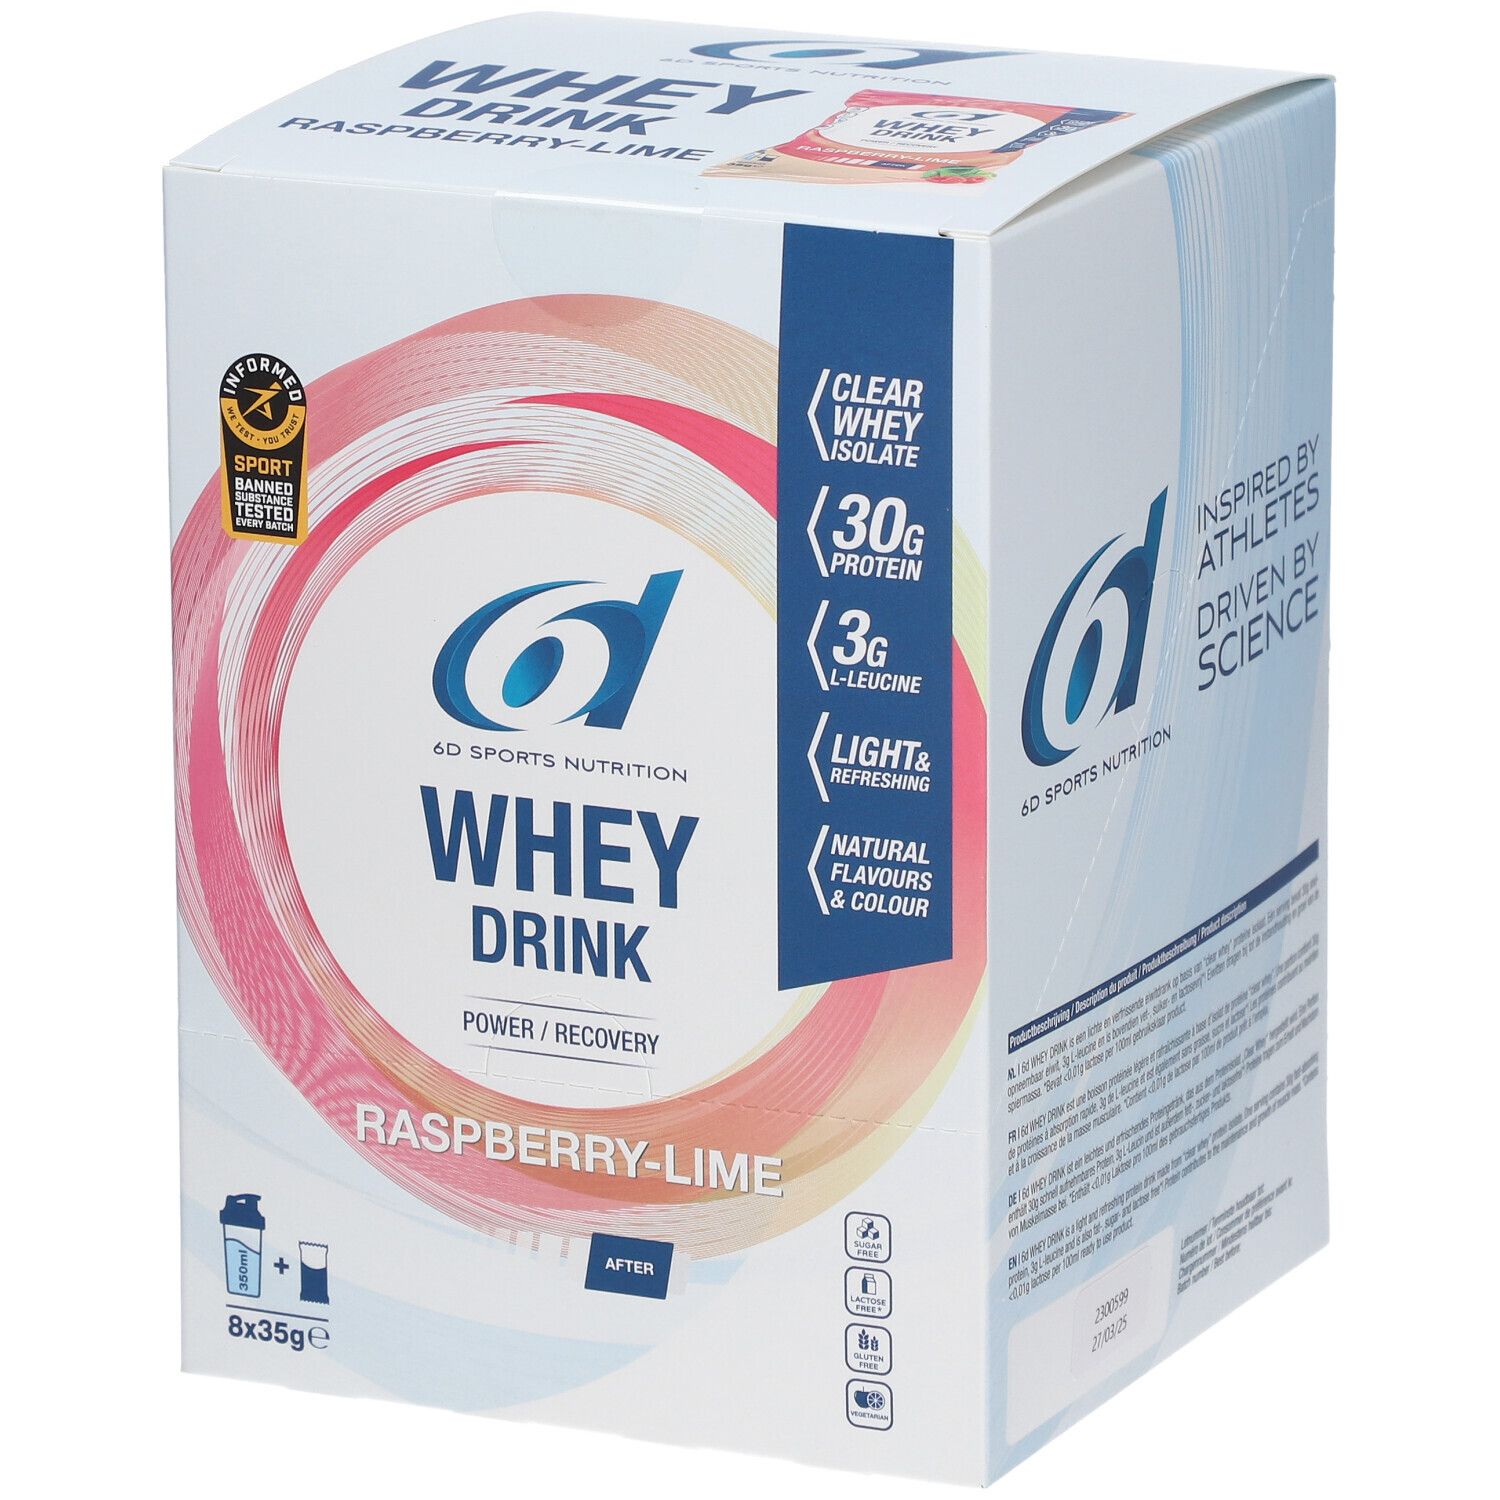 6D Sports Nutrition Whey Drink Framboise-Lime